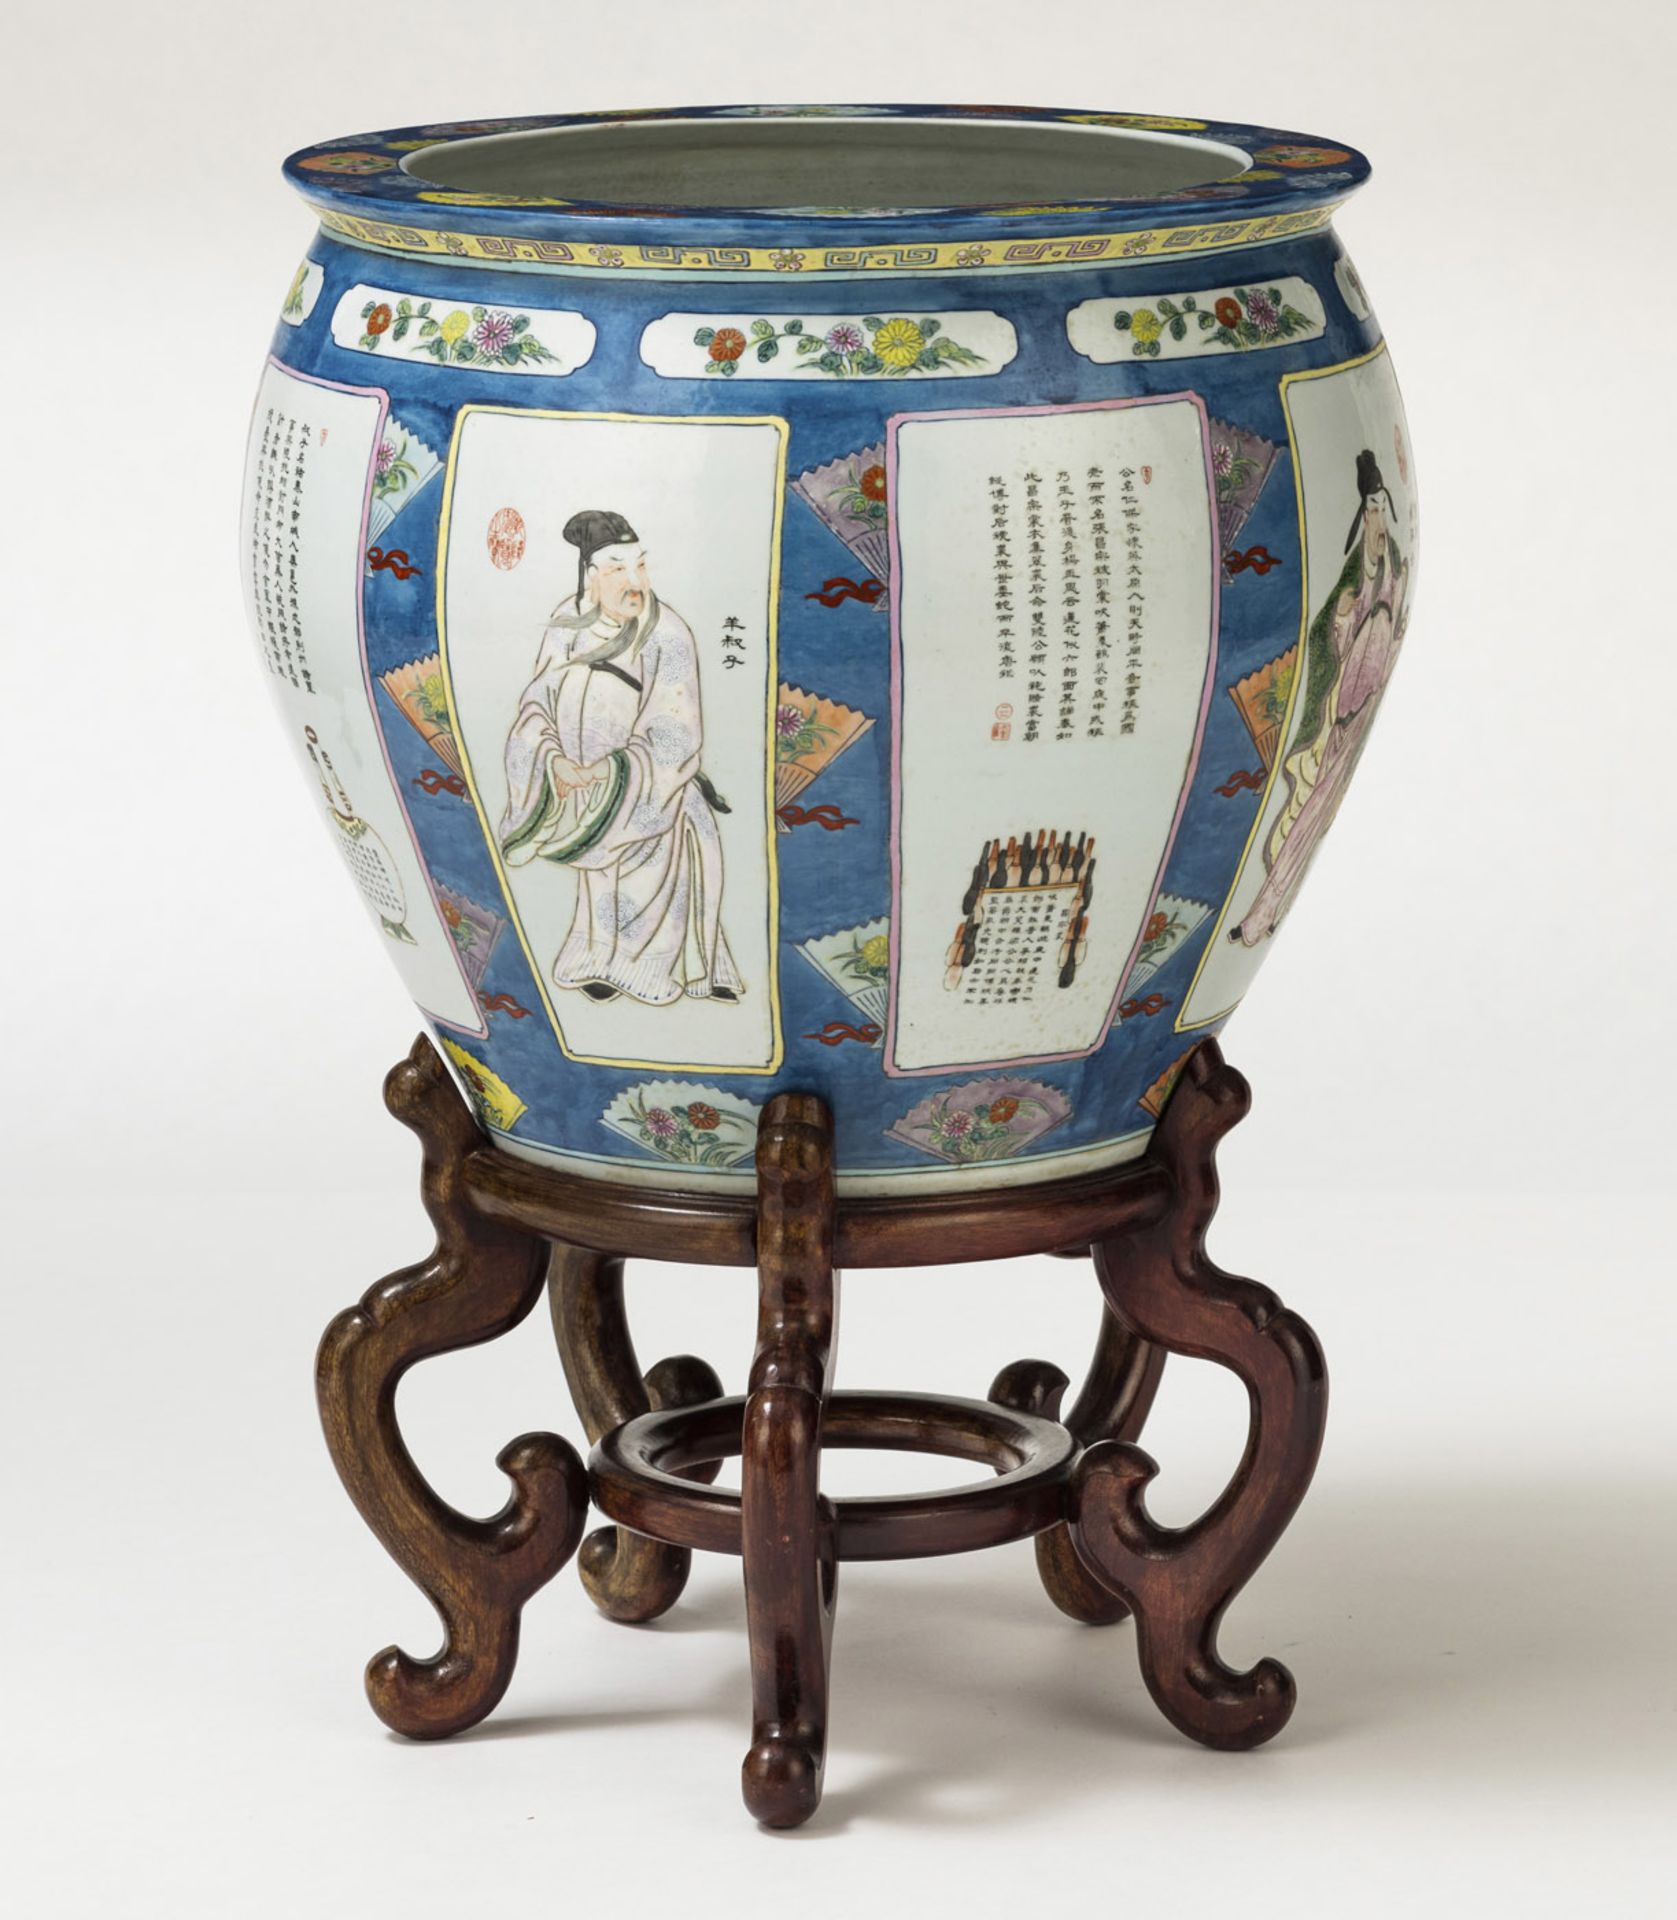 A LARGE BLUE-GROUND PORCELAIN CACHEPOT WITH FIGURES, ANTIQUES AND INSCRIPTIONS - Image 2 of 5